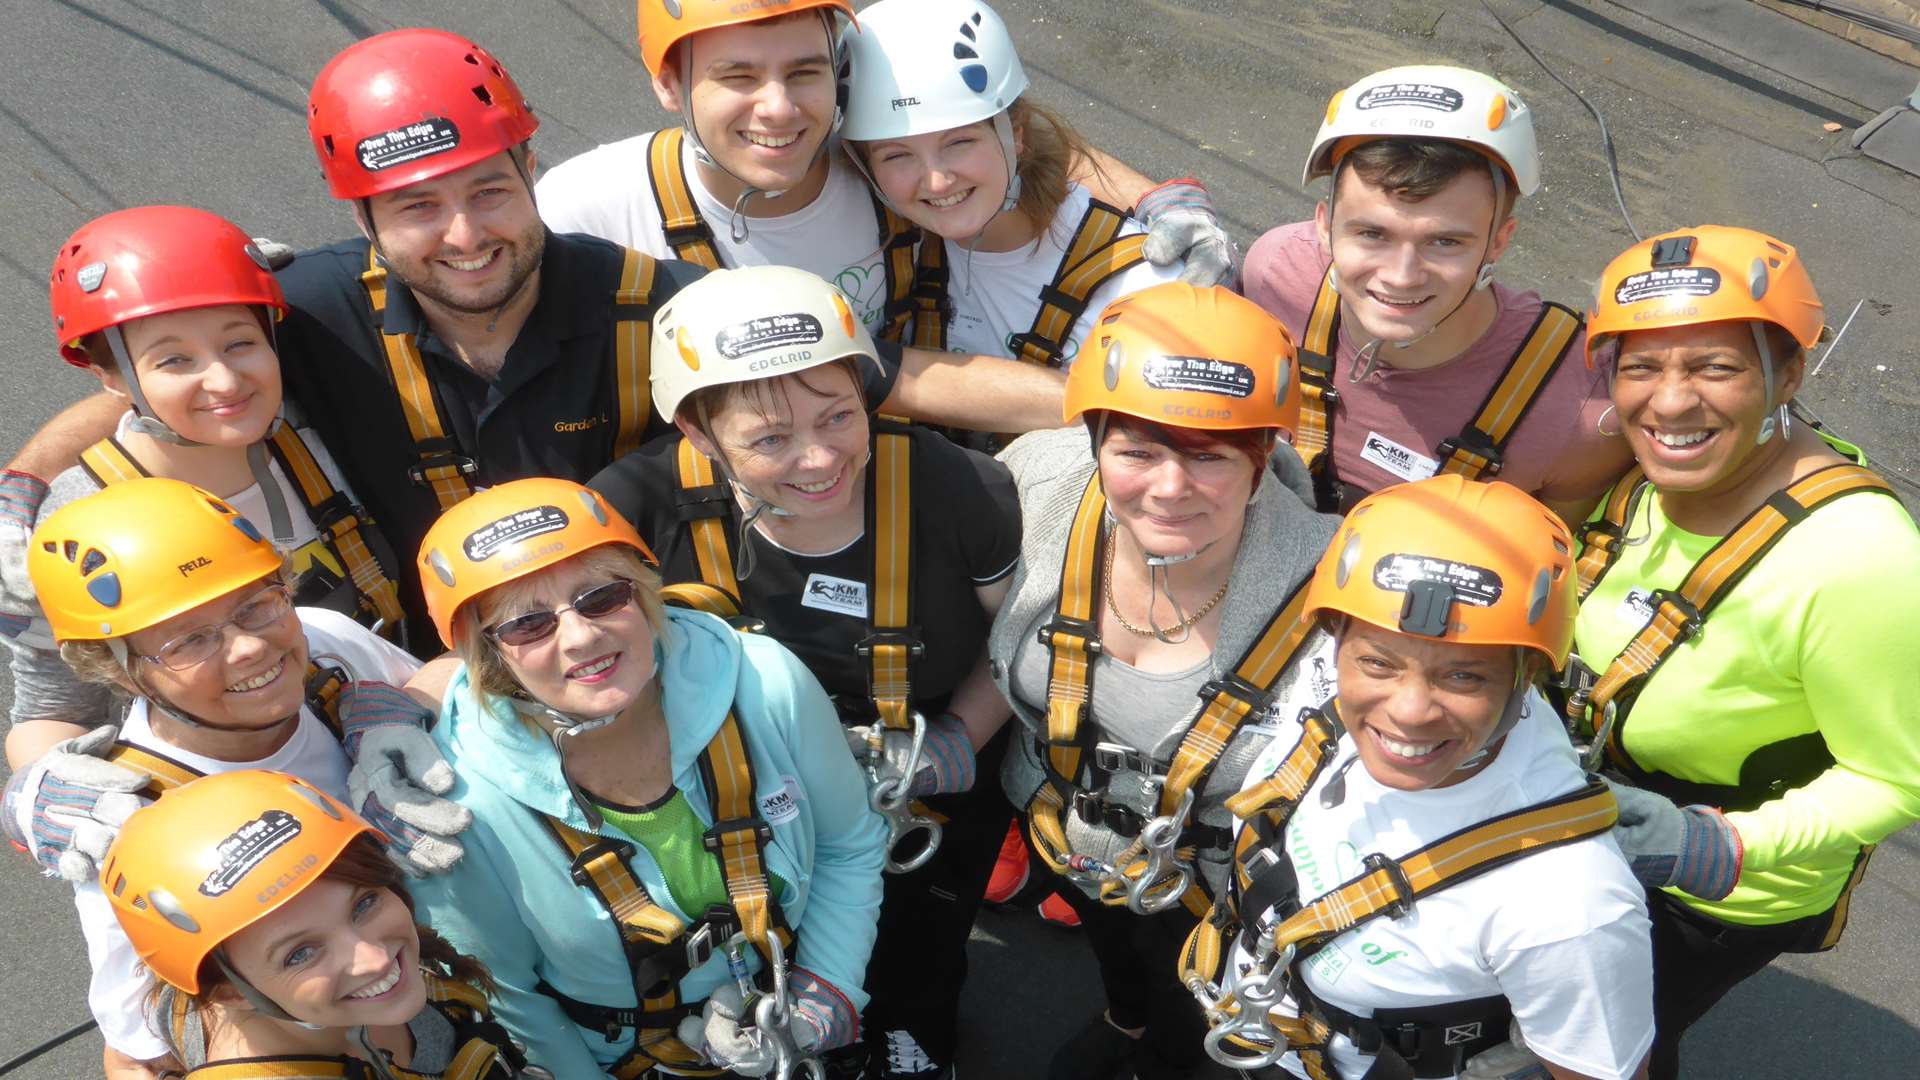 Team Alzheimer of Gravesend, Canterbury, Maidstone, Medway for Alzheimer and Dementia Support Services get ready to face the drop at the KM Maidstone Abseil Challenge which was staged at Midhurst Court, Maidstone on Sunday, June 5.